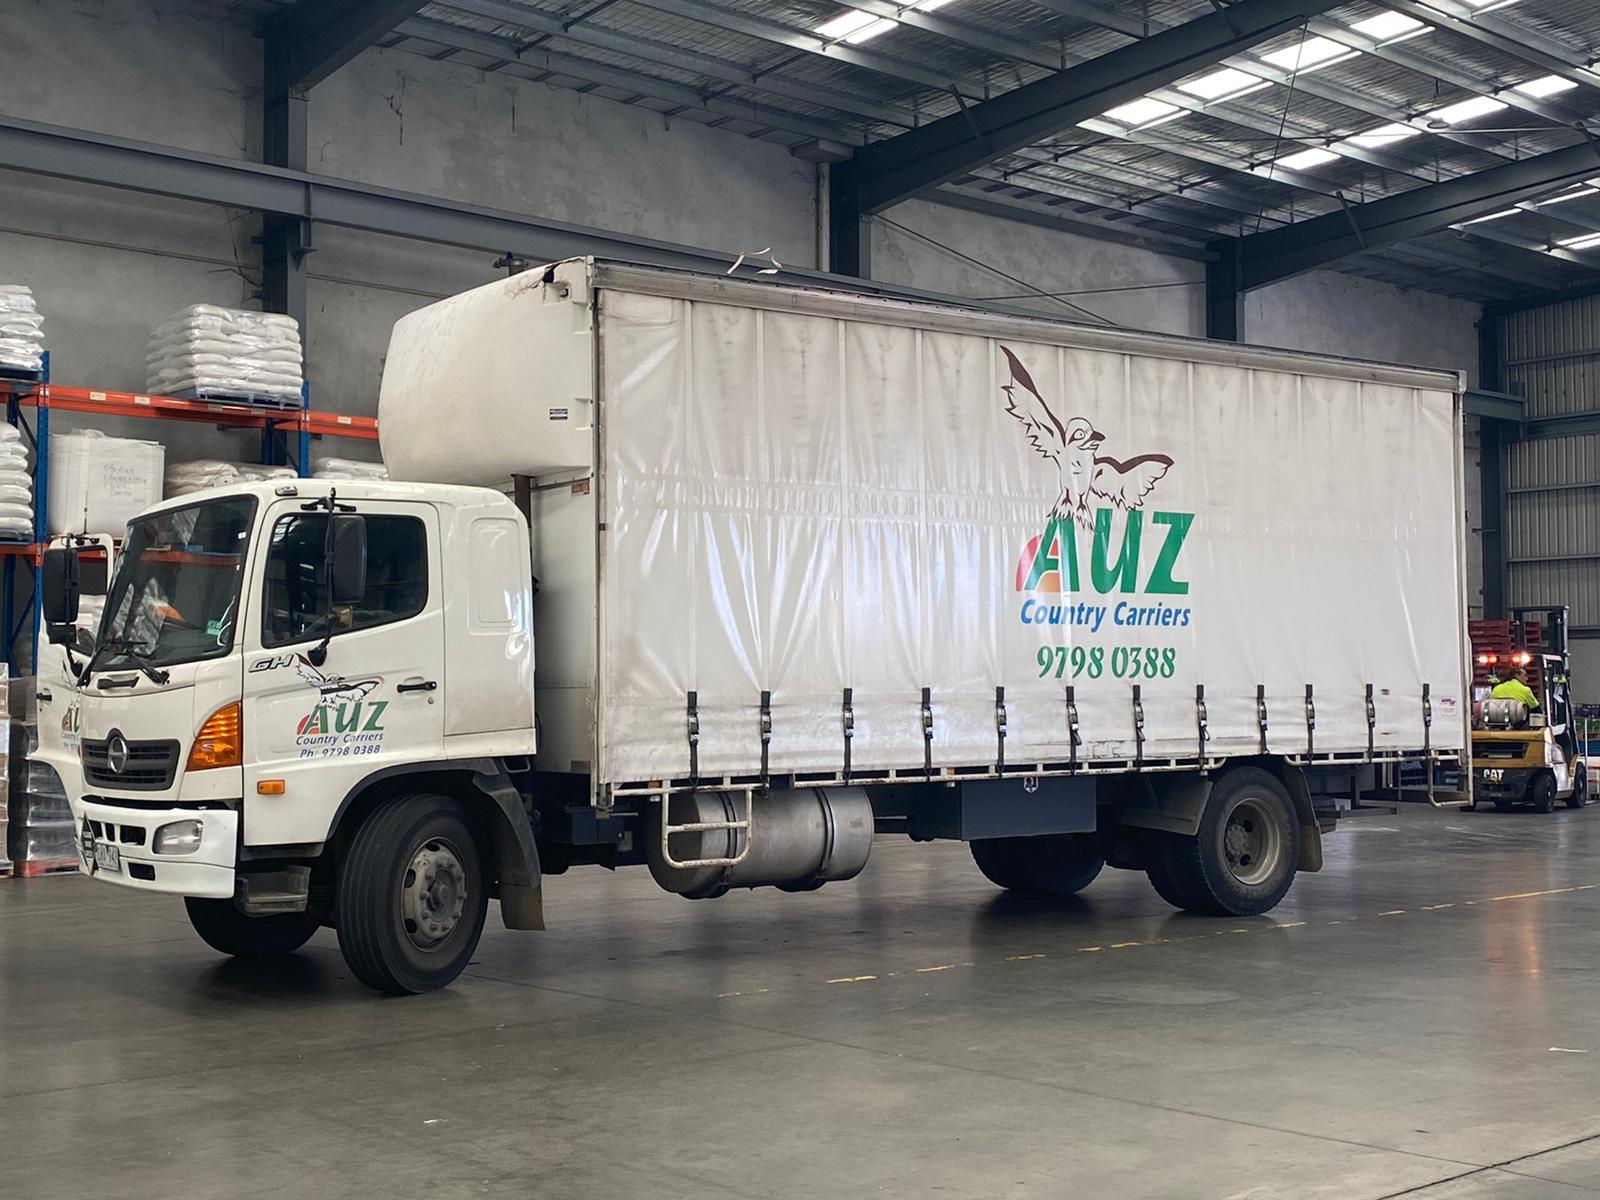 Images Auz Country Carriers